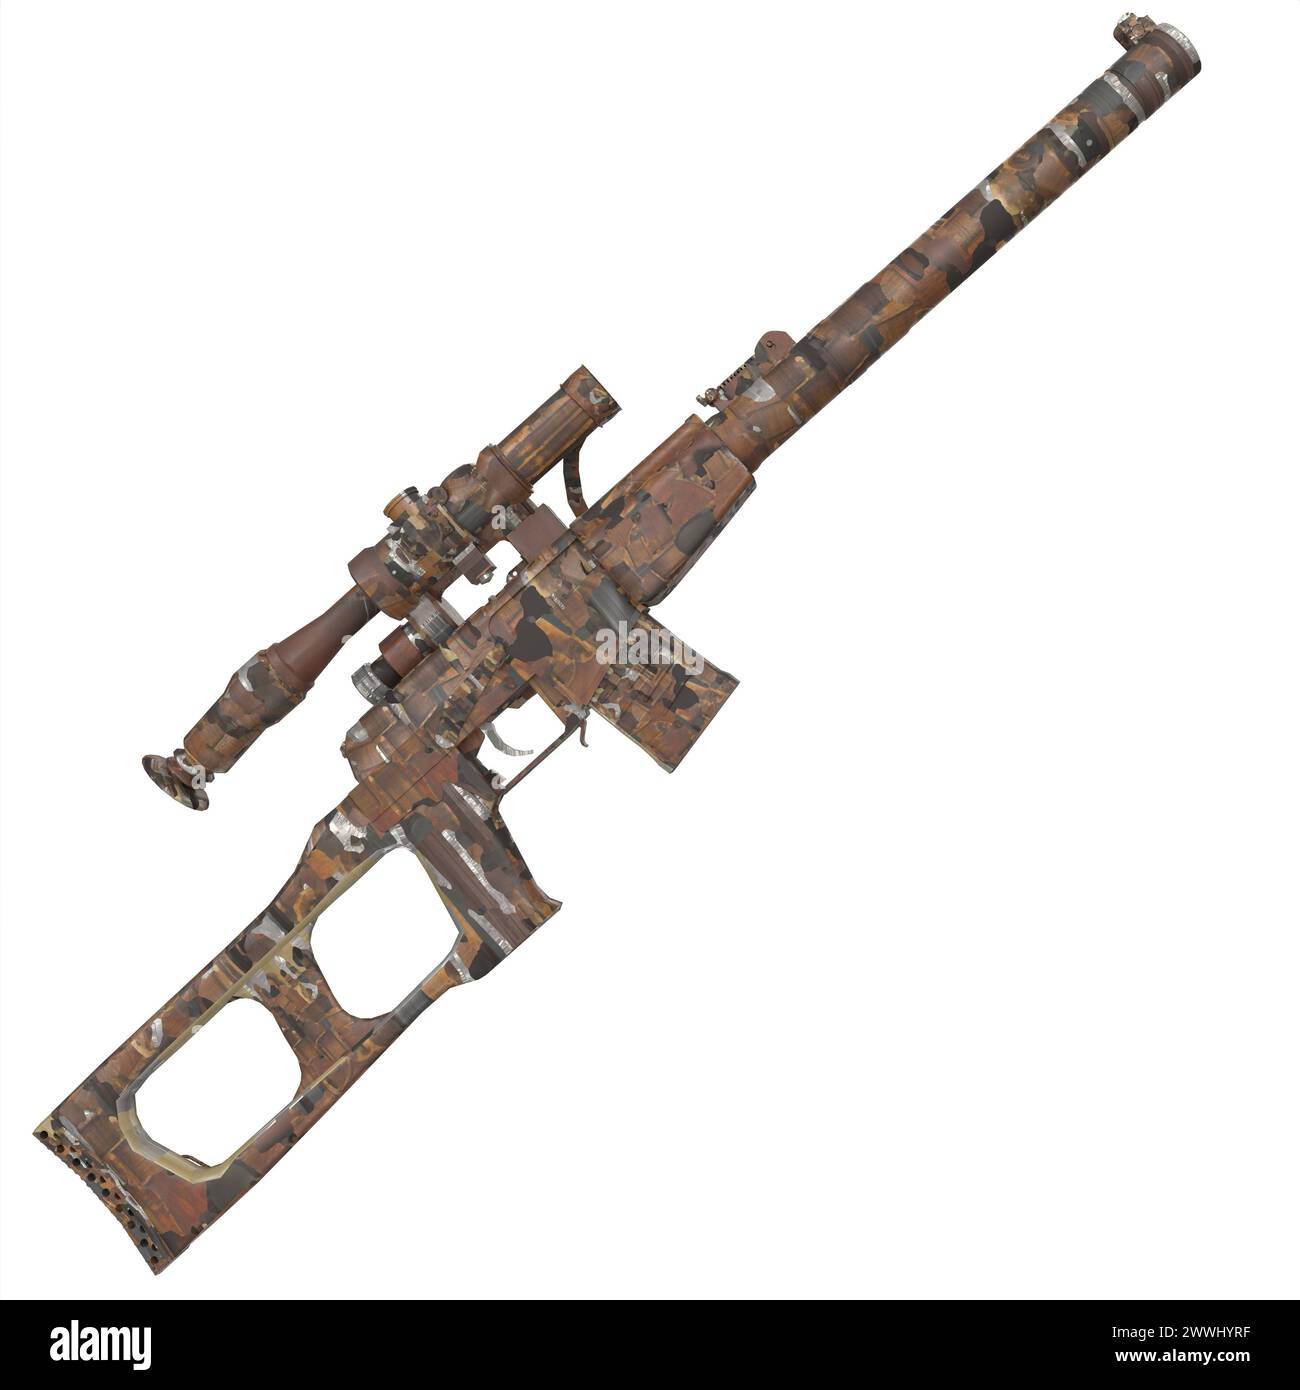 Sniper Rifle isolated on white background Sniper Rifle isolated on white background. High quality 3d illustration Licen Sniper Rifle isolated on white Stock Photo